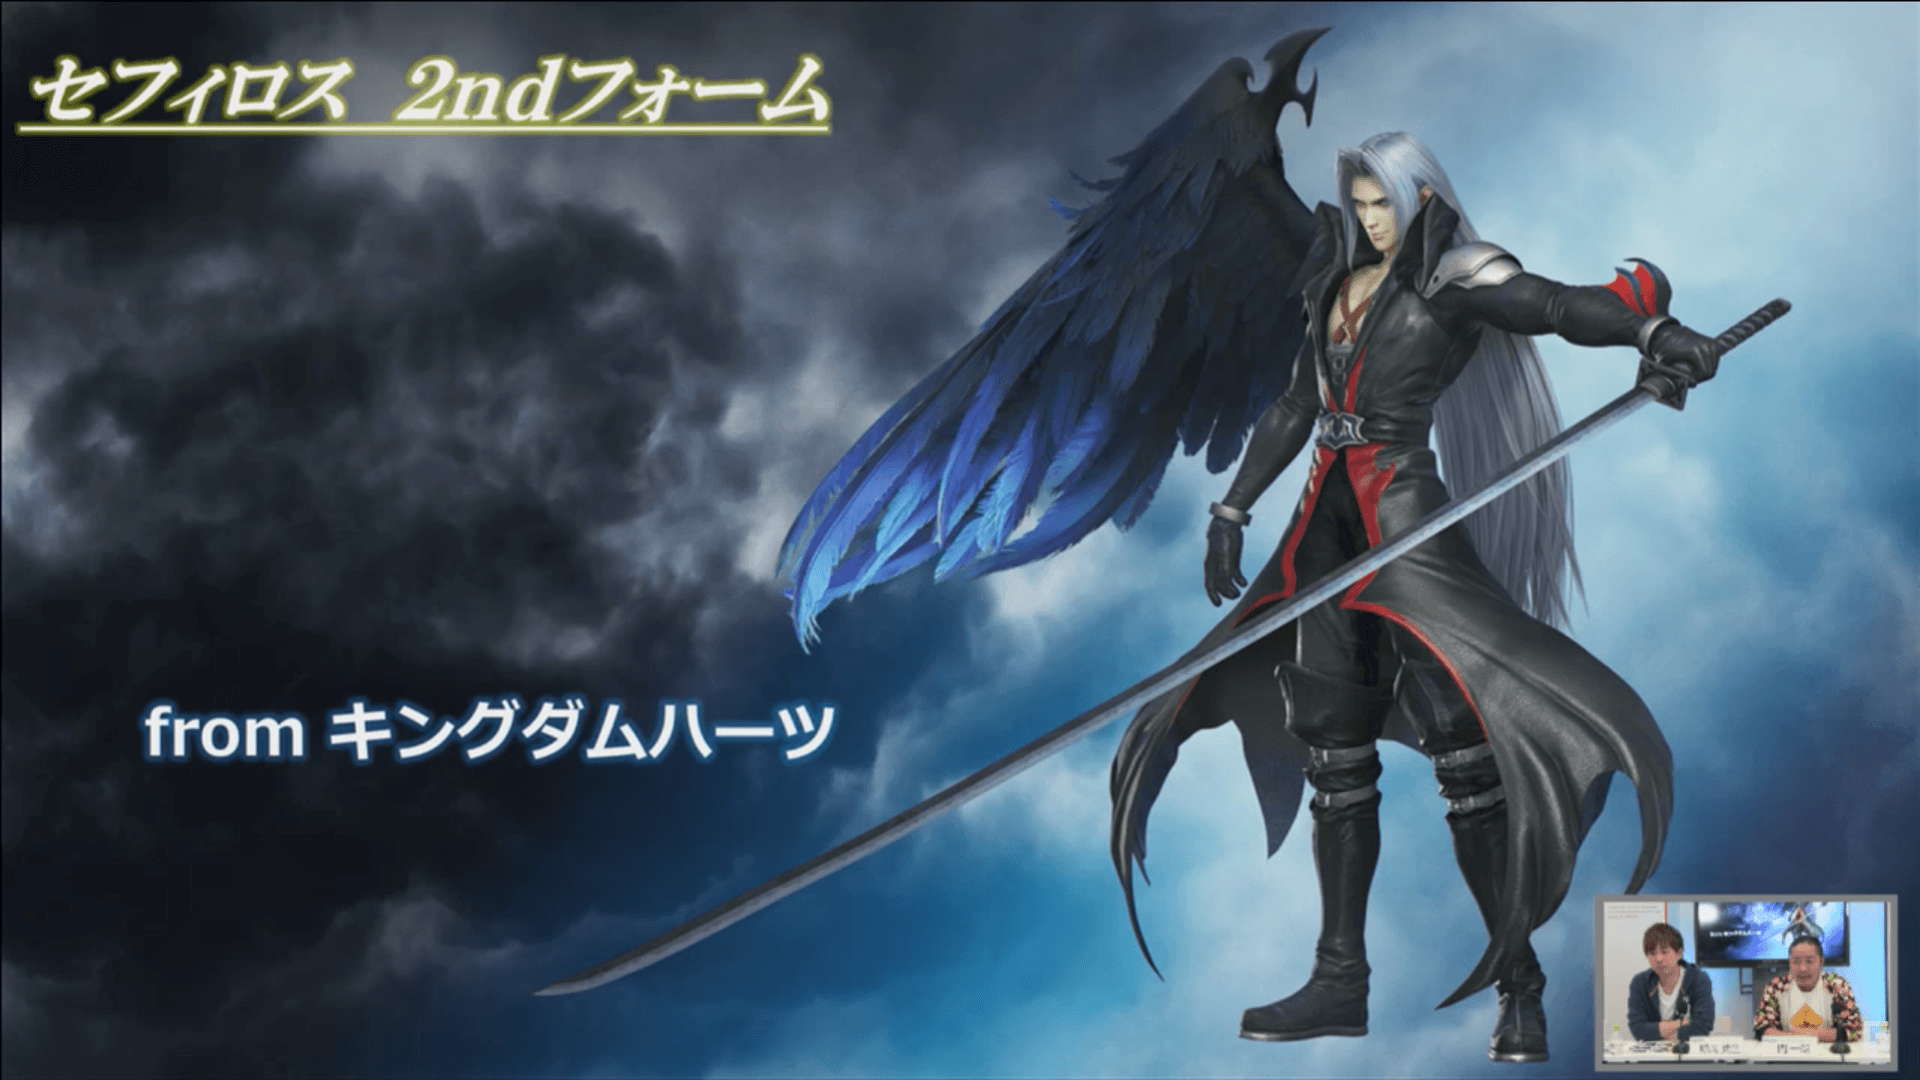 Sephiroth Acquires his Kingdom Hearts Outfit in Dissidia: Final